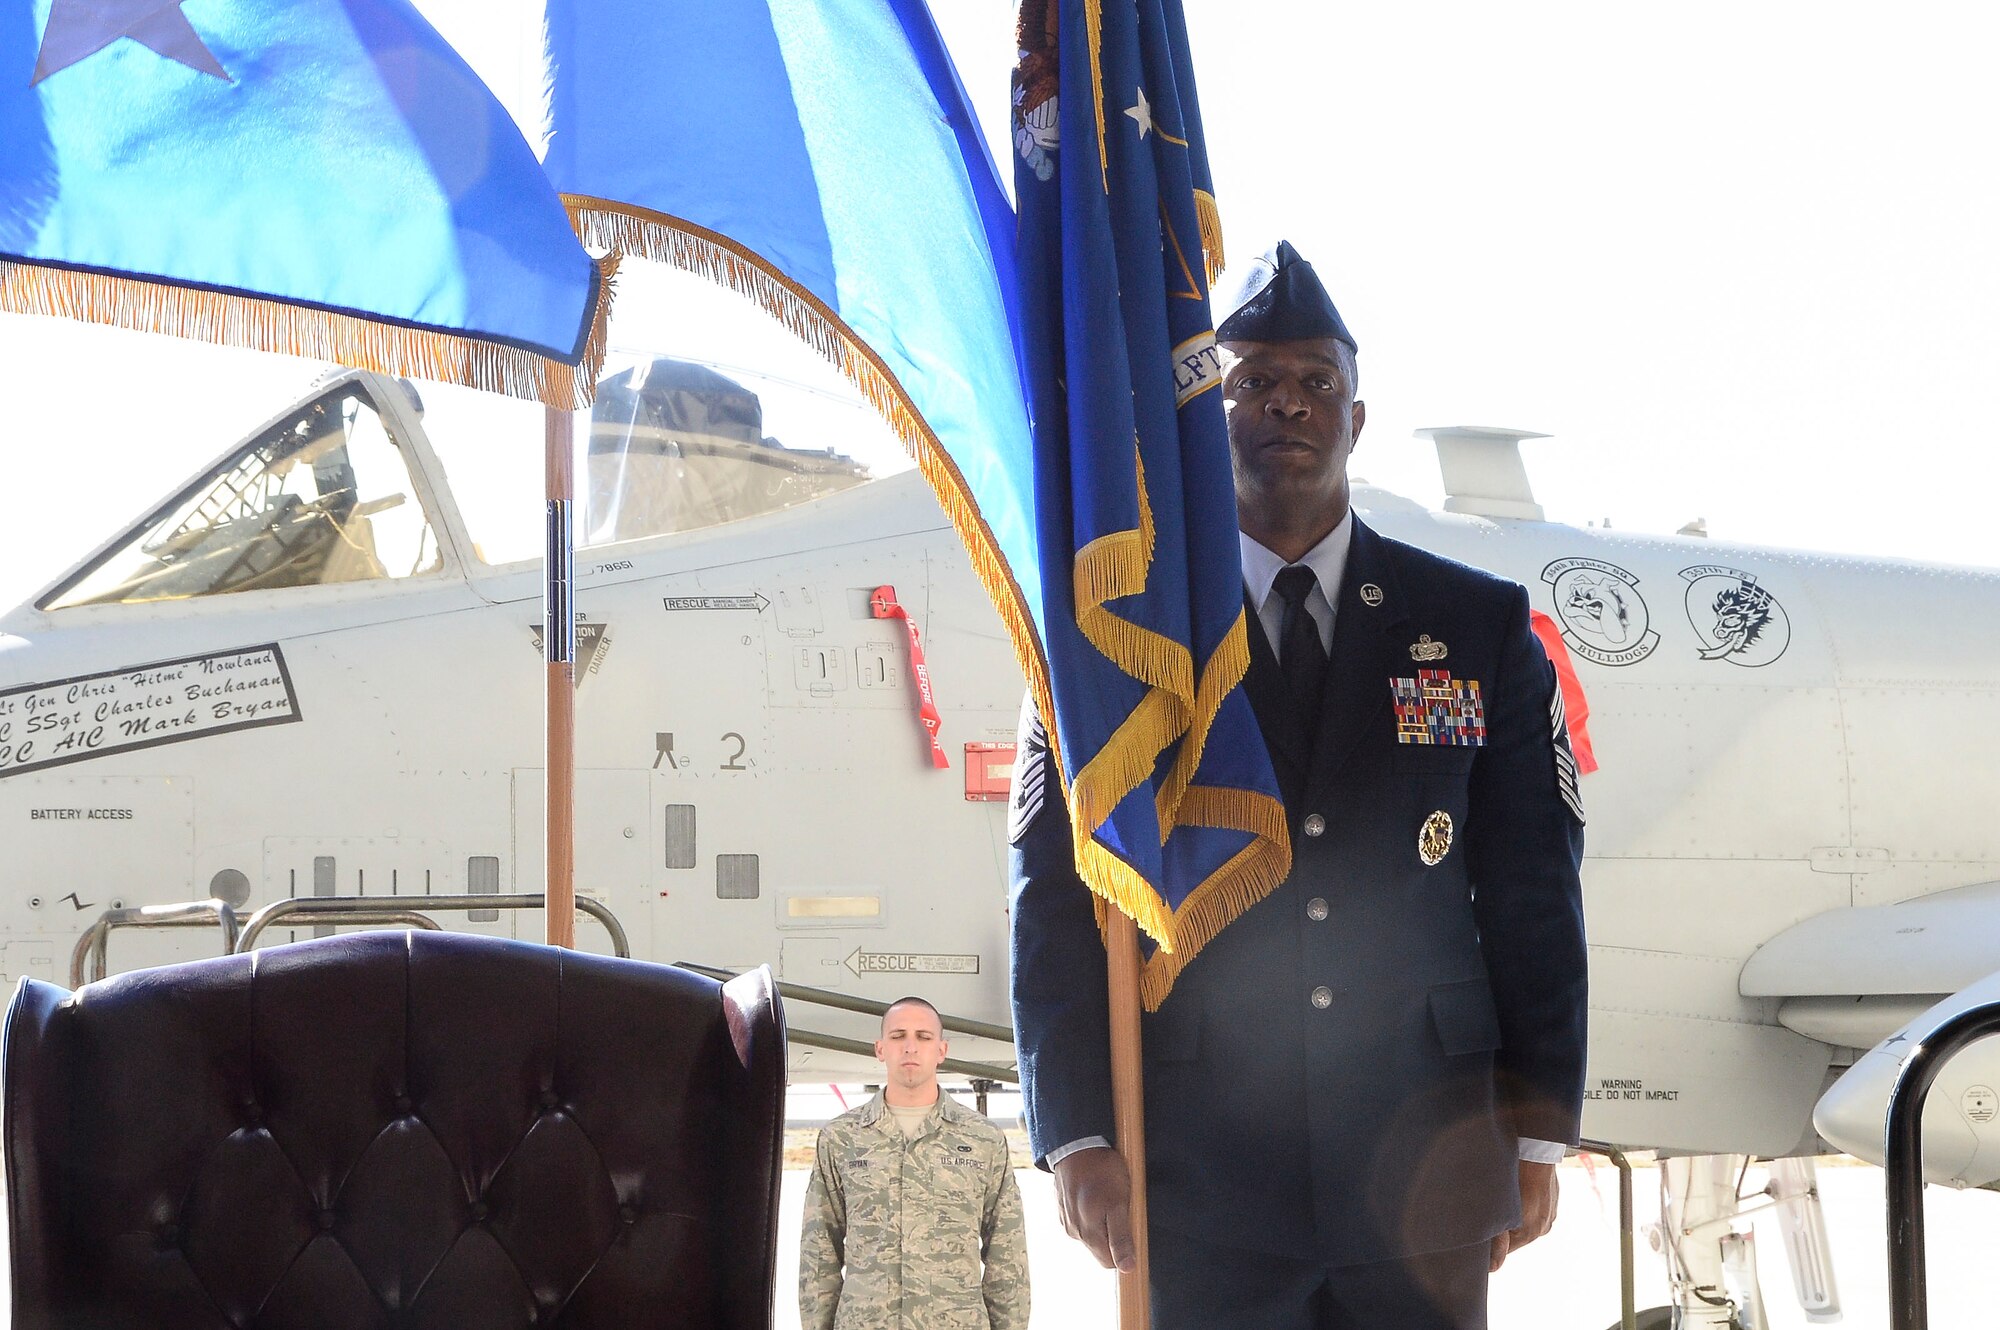 Chief Master Sgt. Calvin Williams, 12th Air Force (Air Forces Southern) Command Chief, holds the 12th AF guidon during a change of command ceremony at Davis-Monthan AFB, Ariz., Dec. 19, 2014. During the ceremony, Lt. Gen. Tod Wolters relinquished command to Lt. Gen. Chris Nowland. (U.S. Air Force photo by Staff Sgt. Adam Grant/Released)